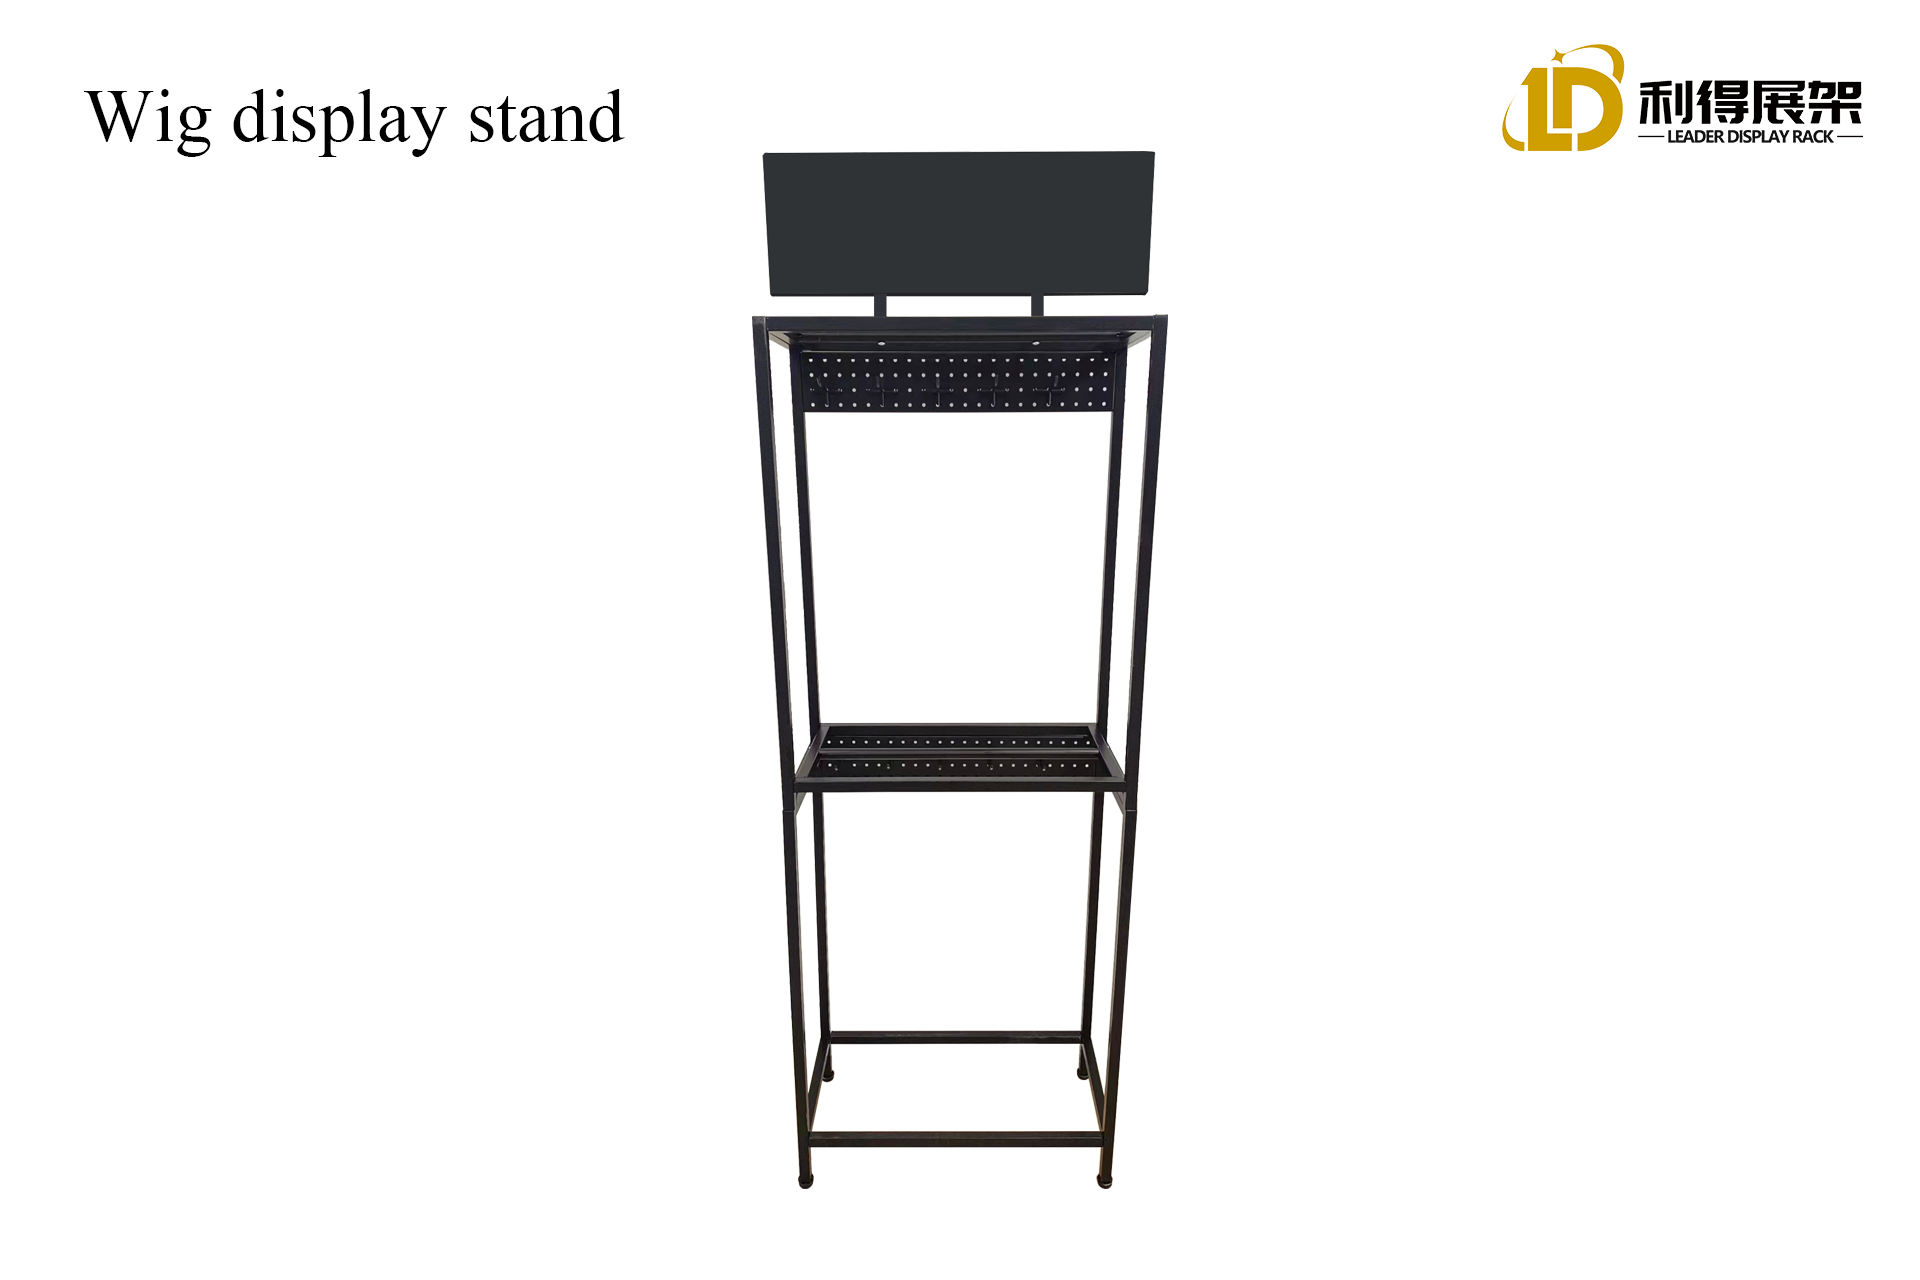 The Important Role And Innovative Design of Wig Display Stand in Retail Industry